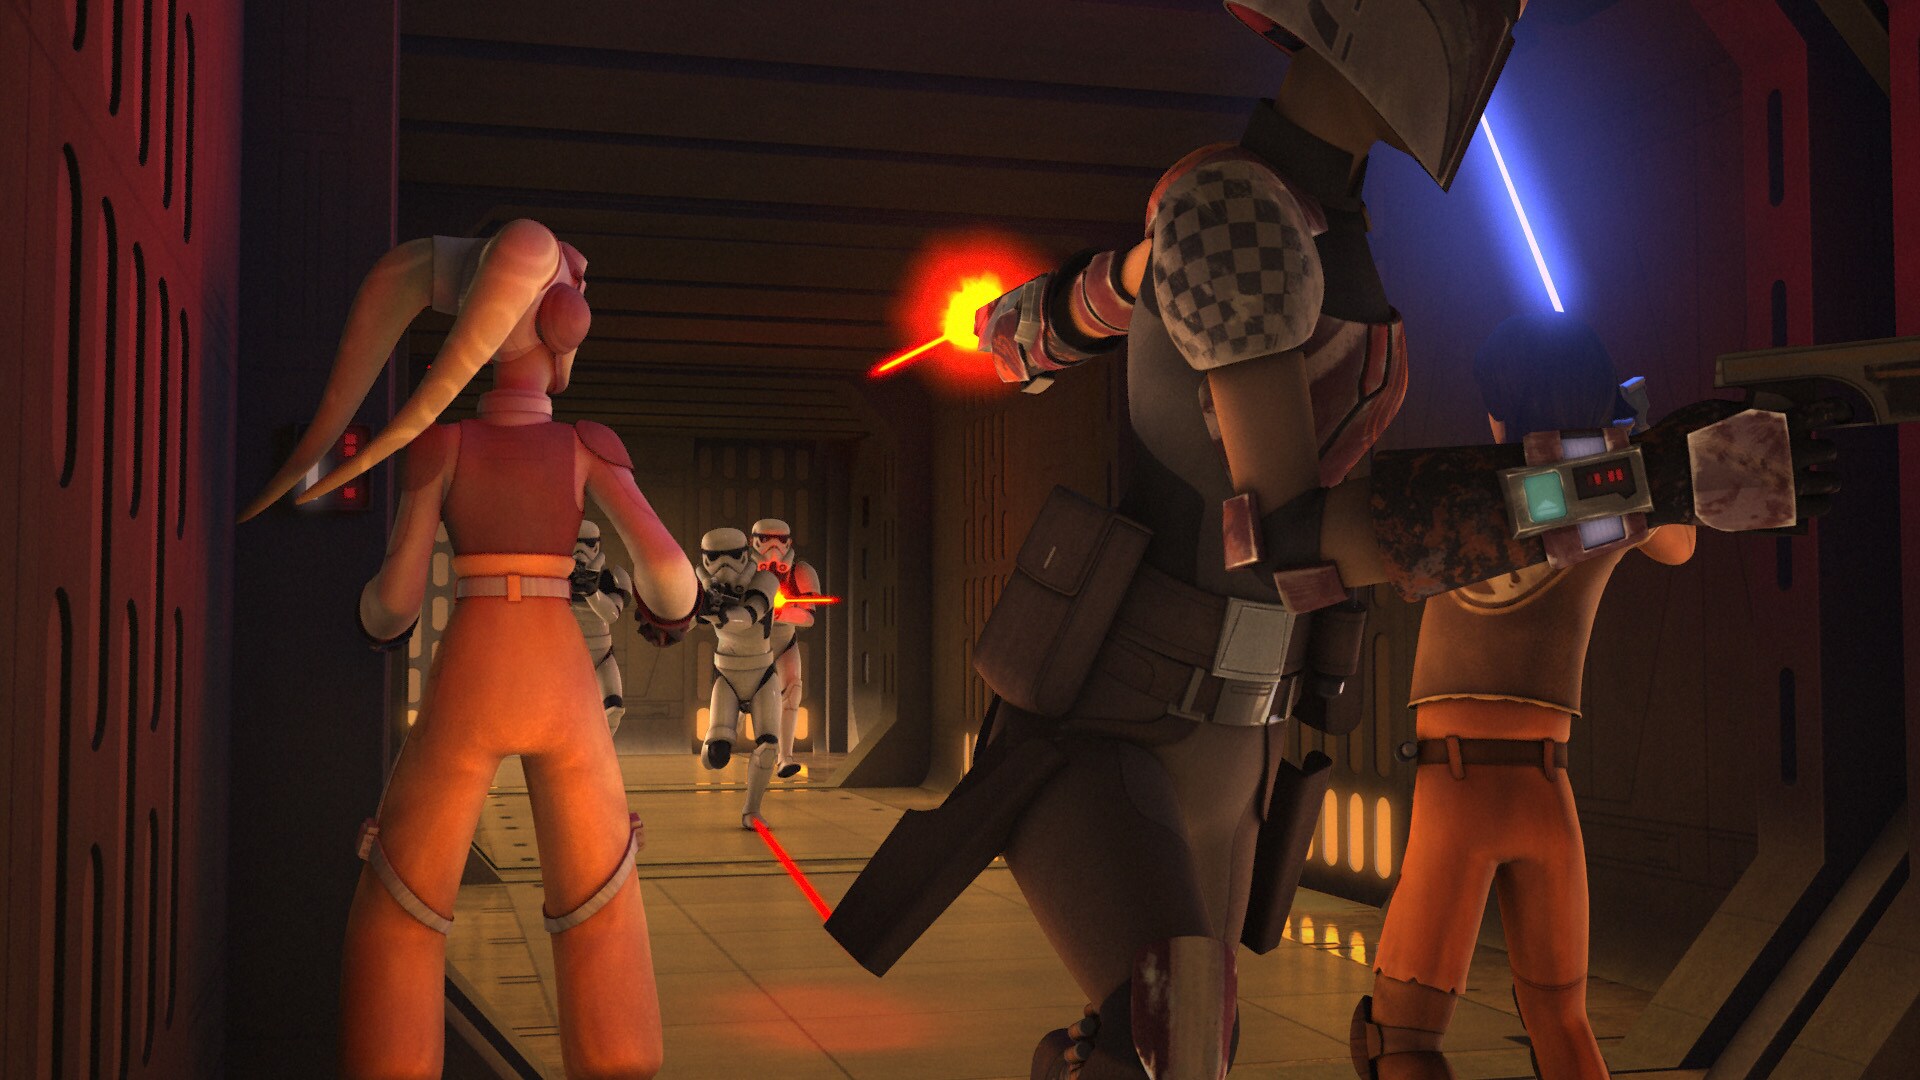 The reinforcements arrive quickly, cutting off the path to Kanan's cell. But they're not blocked ...